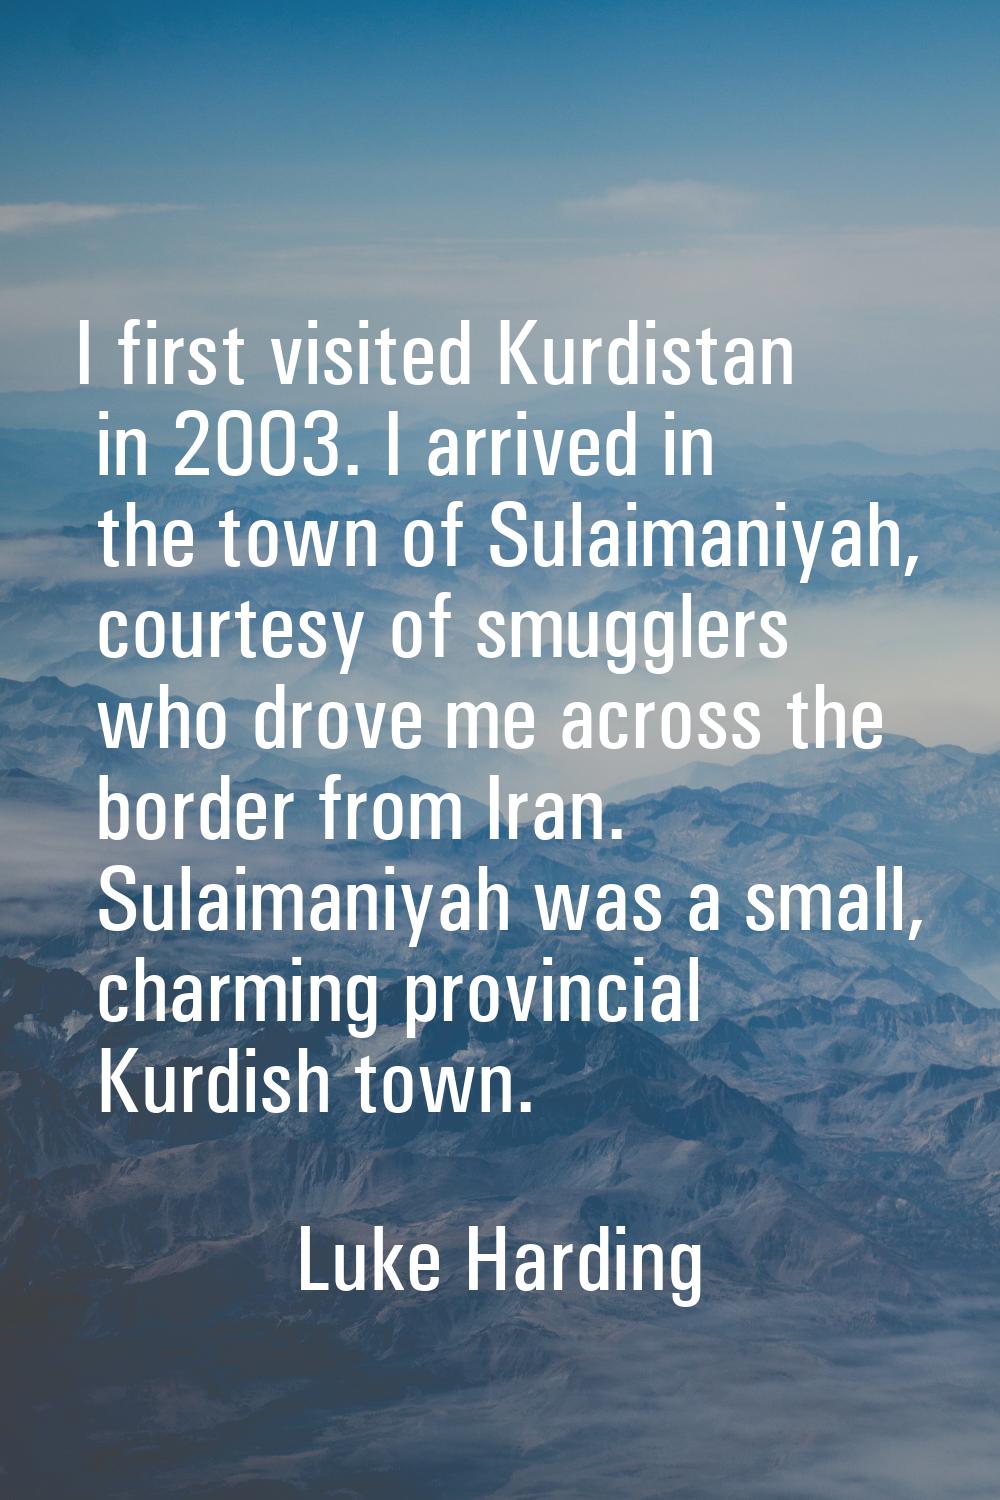 I first visited Kurdistan in 2003. I arrived in the town of Sulaimaniyah, courtesy of smugglers who